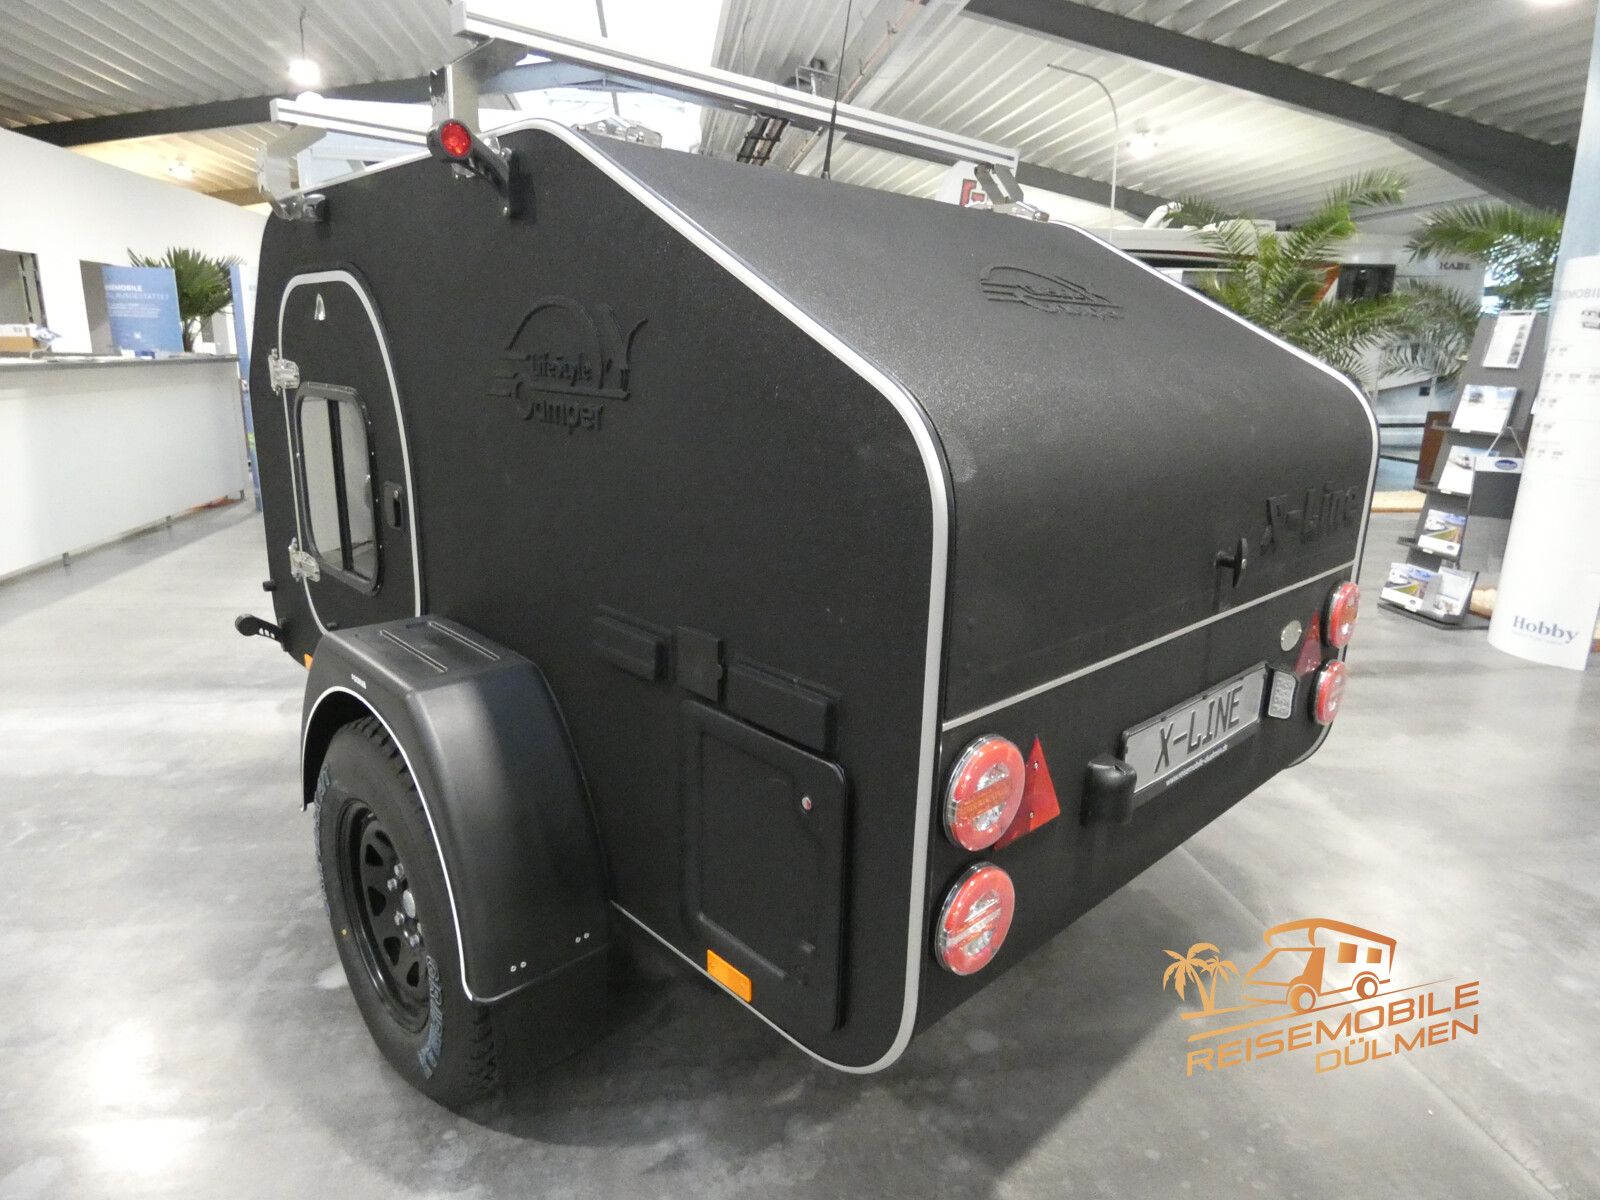 Andere LifeStyle Camper X-Line Dusche Dachreling Herd